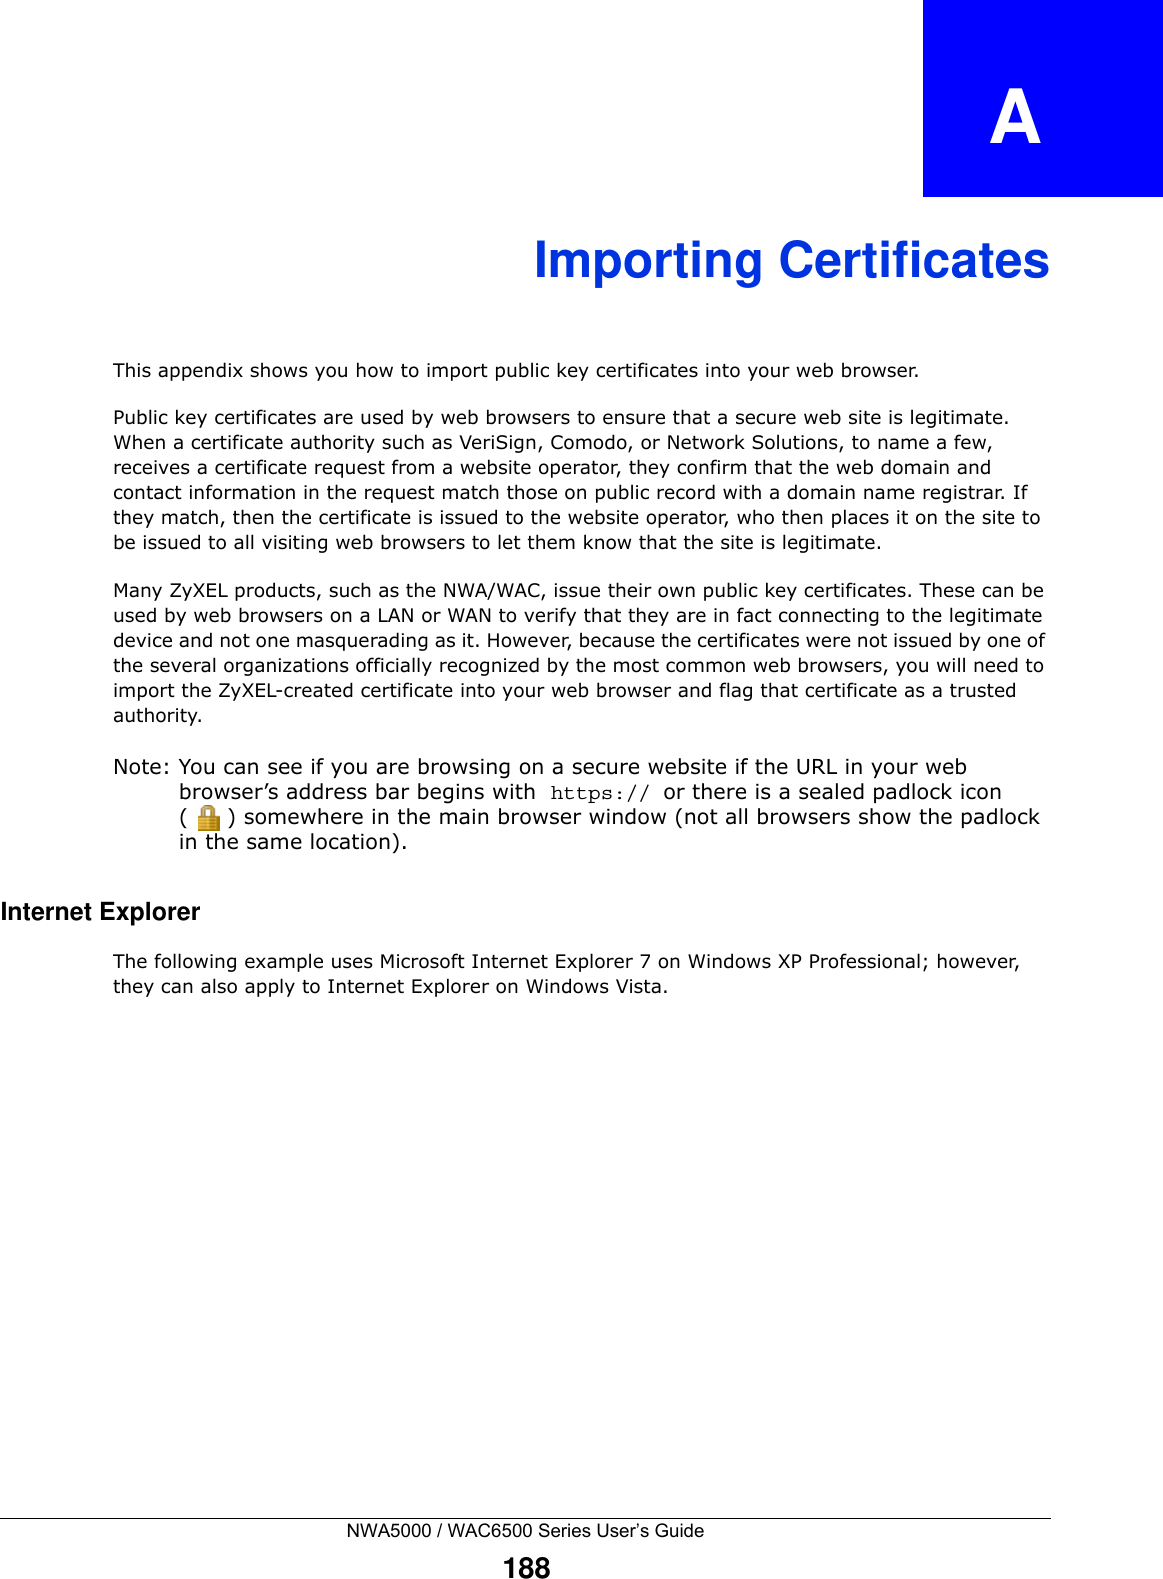 NWA5000 / WAC6500 Series User’s Guide188APPENDIX   AImporting CertificatesThis appendix shows you how to import public key certificates into your web browser. Public key certificates are used by web browsers to ensure that a secure web site is legitimate. When a certificate authority such as VeriSign, Comodo, or Network Solutions, to name a few, receives a certificate request from a website operator, they confirm that the web domain and contact information in the request match those on public record with a domain name registrar. If they match, then the certificate is issued to the website operator, who then places it on the site to be issued to all visiting web browsers to let them know that the site is legitimate.Many ZyXEL products, such as the NWA/WAC, issue their own public key certificates. These can be used by web browsers on a LAN or WAN to verify that they are in fact connecting to the legitimate device and not one masquerading as it. However, because the certificates were not issued by one of the several organizations officially recognized by the most common web browsers, you will need to import the ZyXEL-created certificate into your web browser and flag that certificate as a trusted authority.Note: You can see if you are browsing on a secure website if the URL in your web browser’s address bar begins with  https:// or there is a sealed padlock icon ( ) somewhere in the main browser window (not all browsers show the padlock in the same location).Internet ExplorerThe following example uses Microsoft Internet Explorer 7 on Windows XP Professional; however, they can also apply to Internet Explorer on Windows Vista.